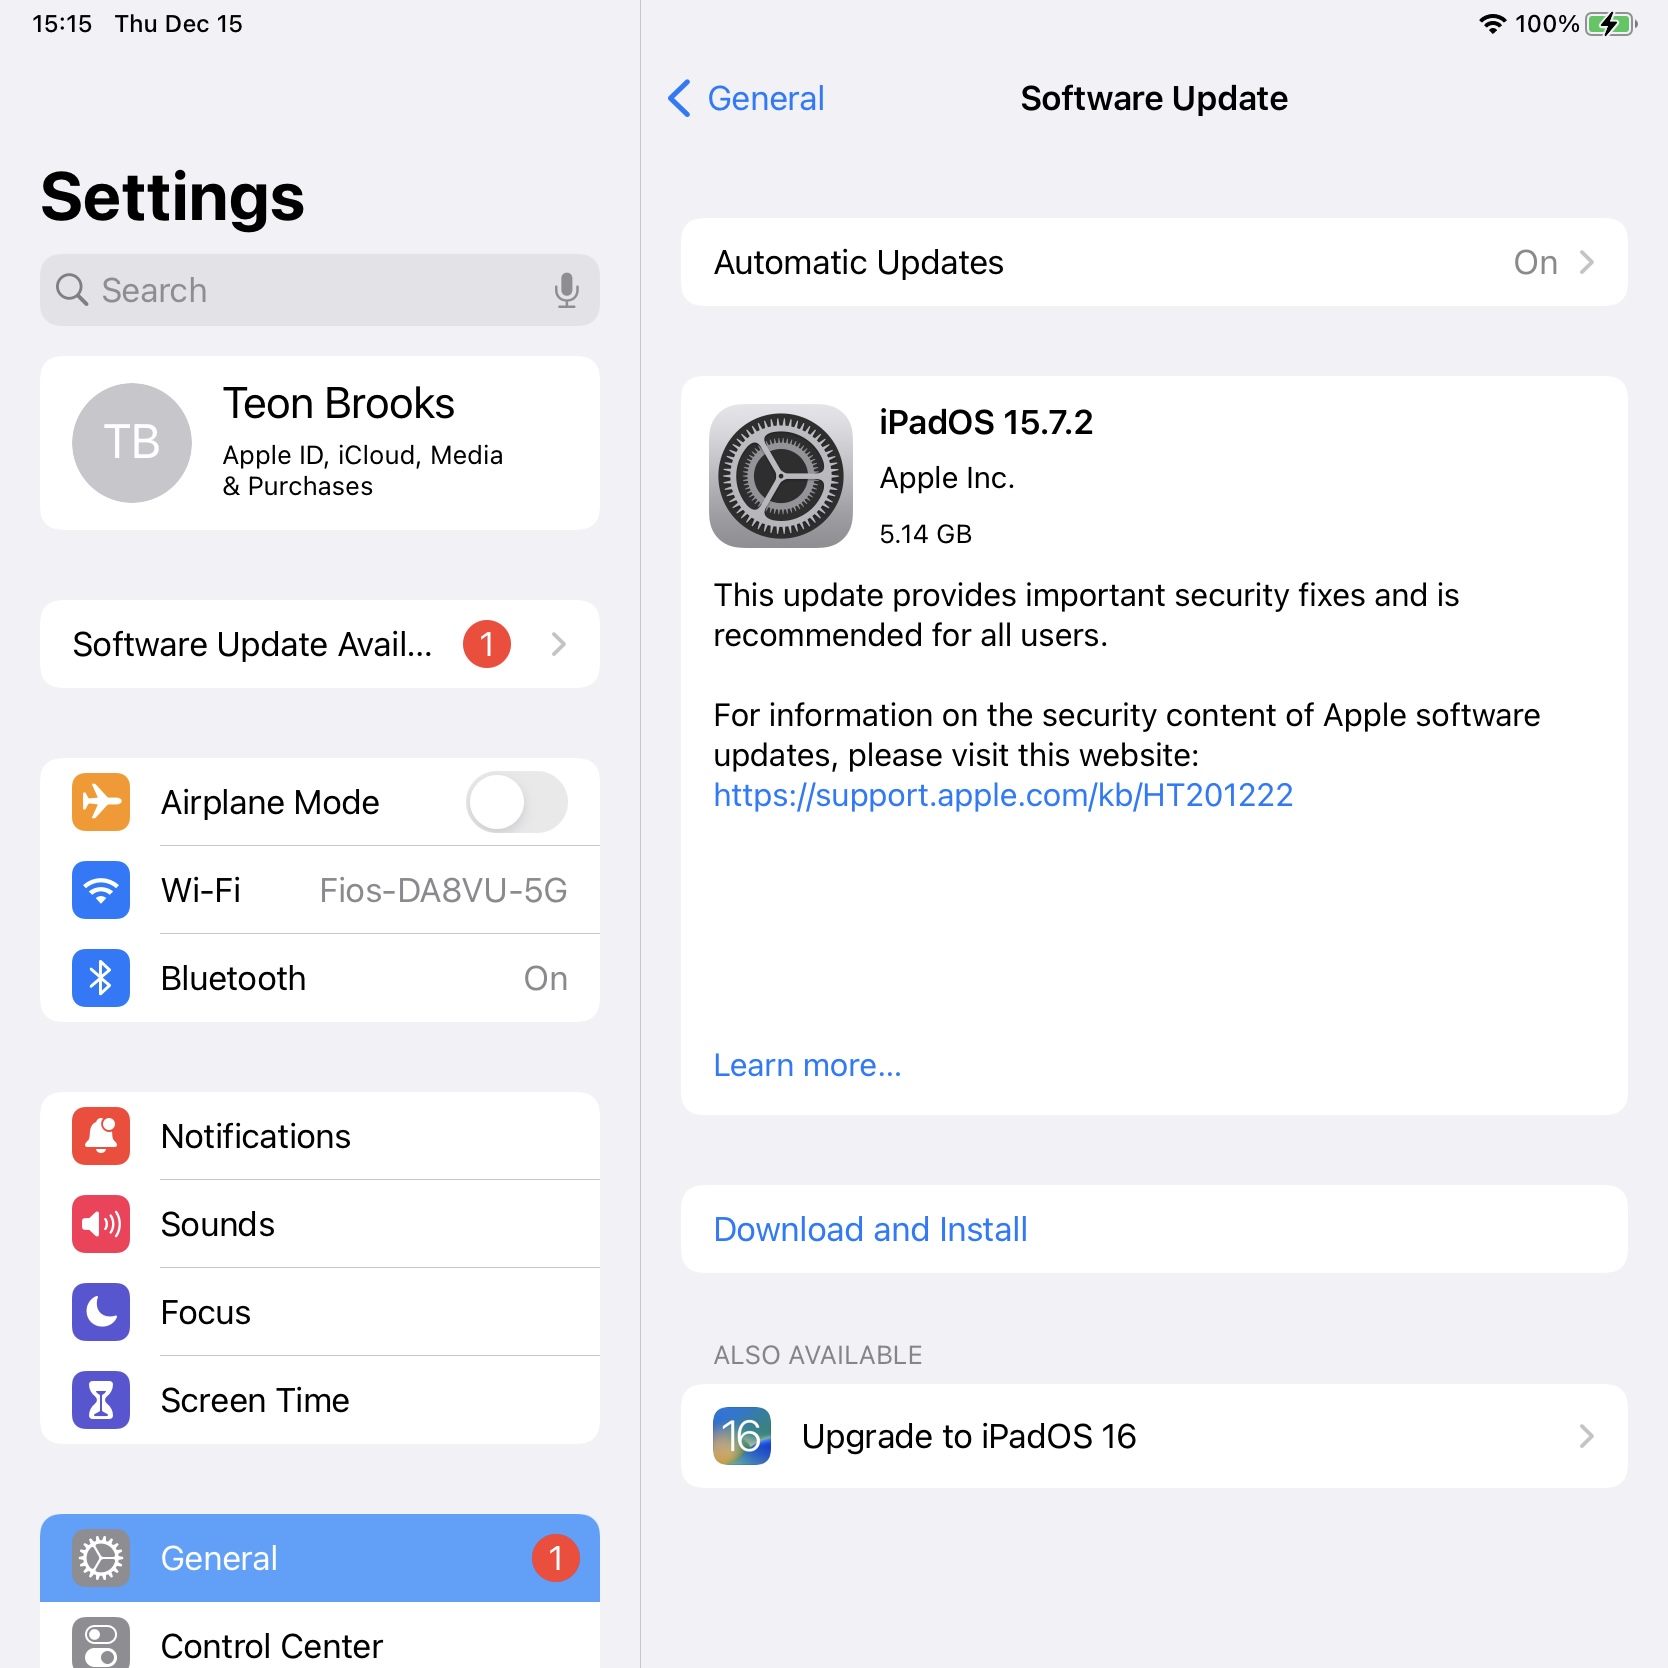 Settings now reveal that iPadOS16 is in fact now available